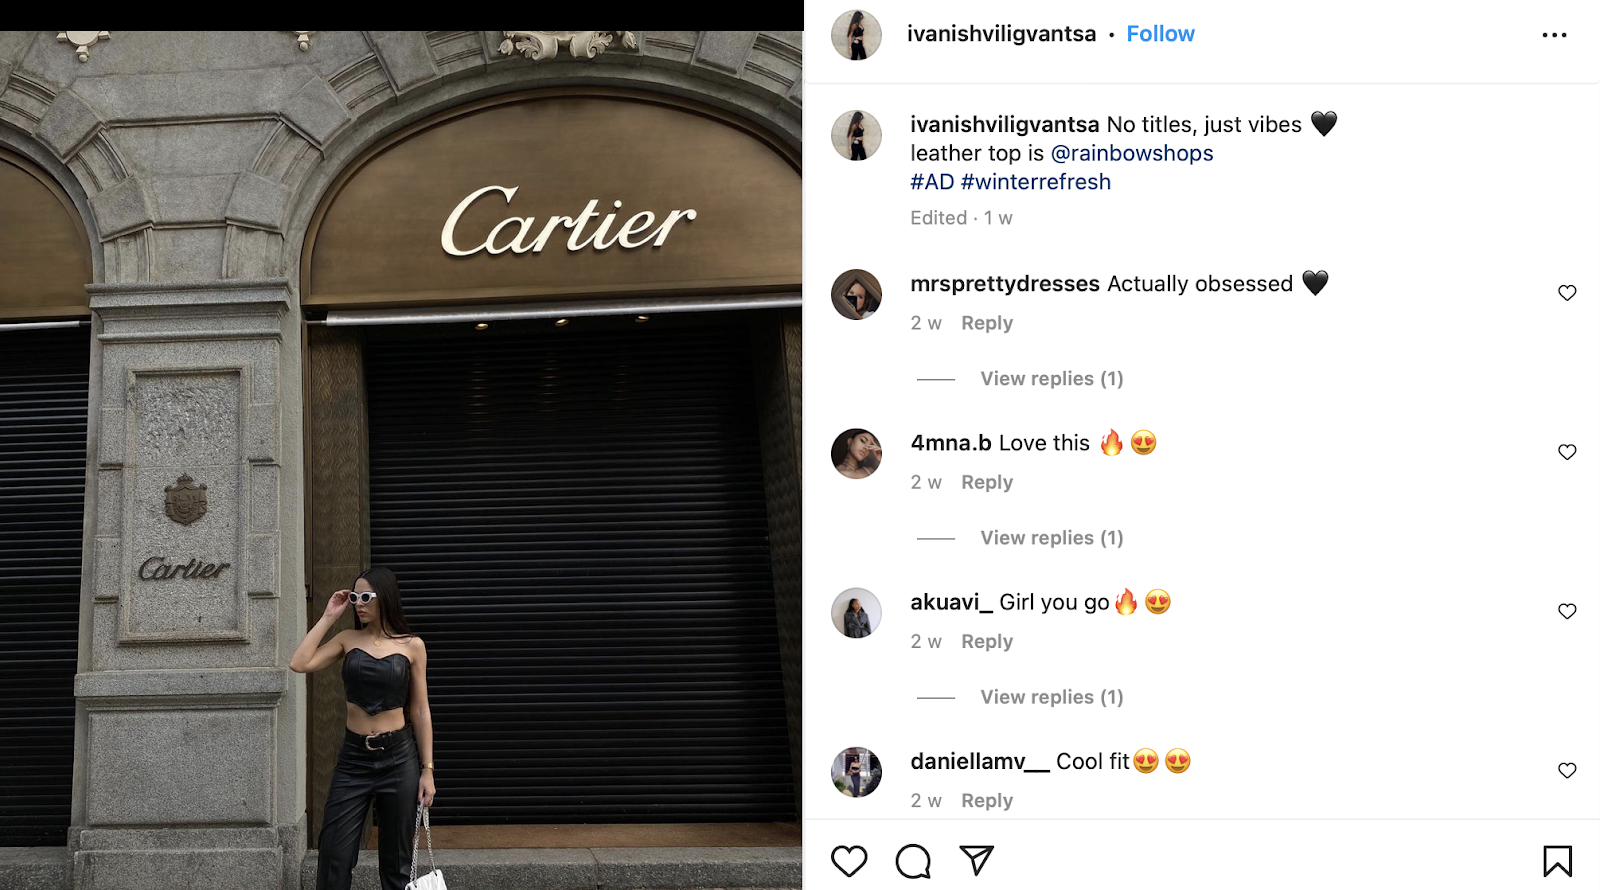 An example of a micro-influencer